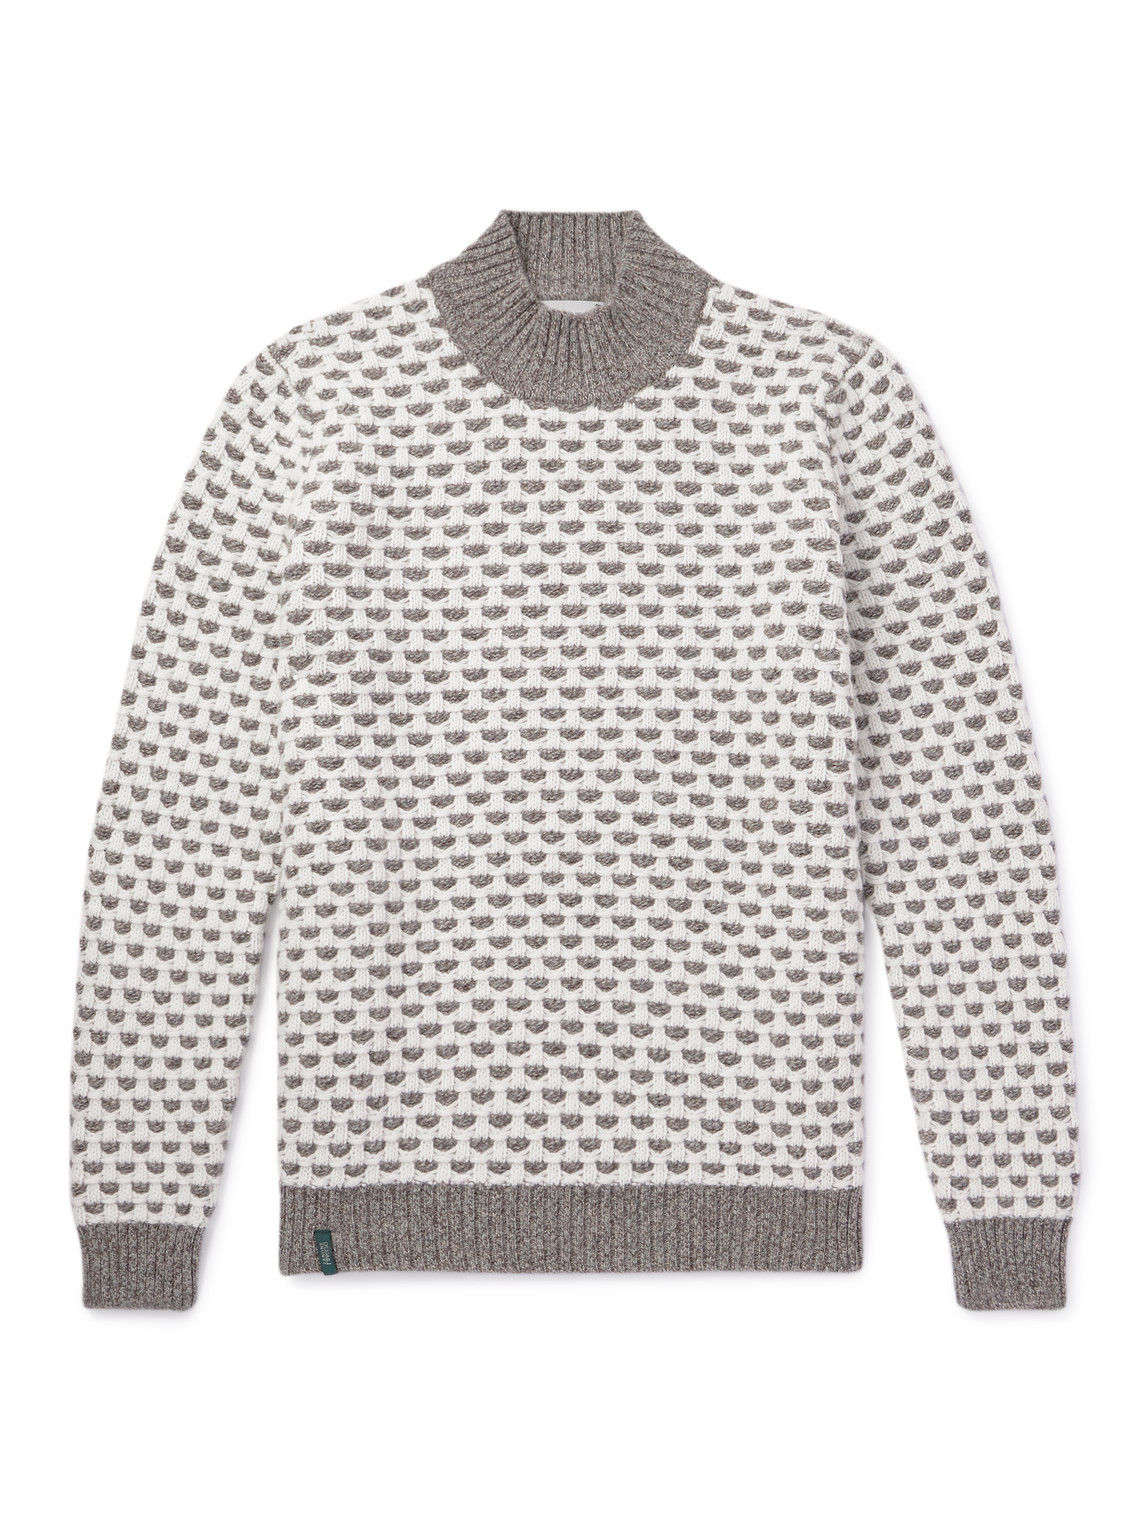 Incotex Reversible Knitted Wool Mock-neck Sweater In Gray